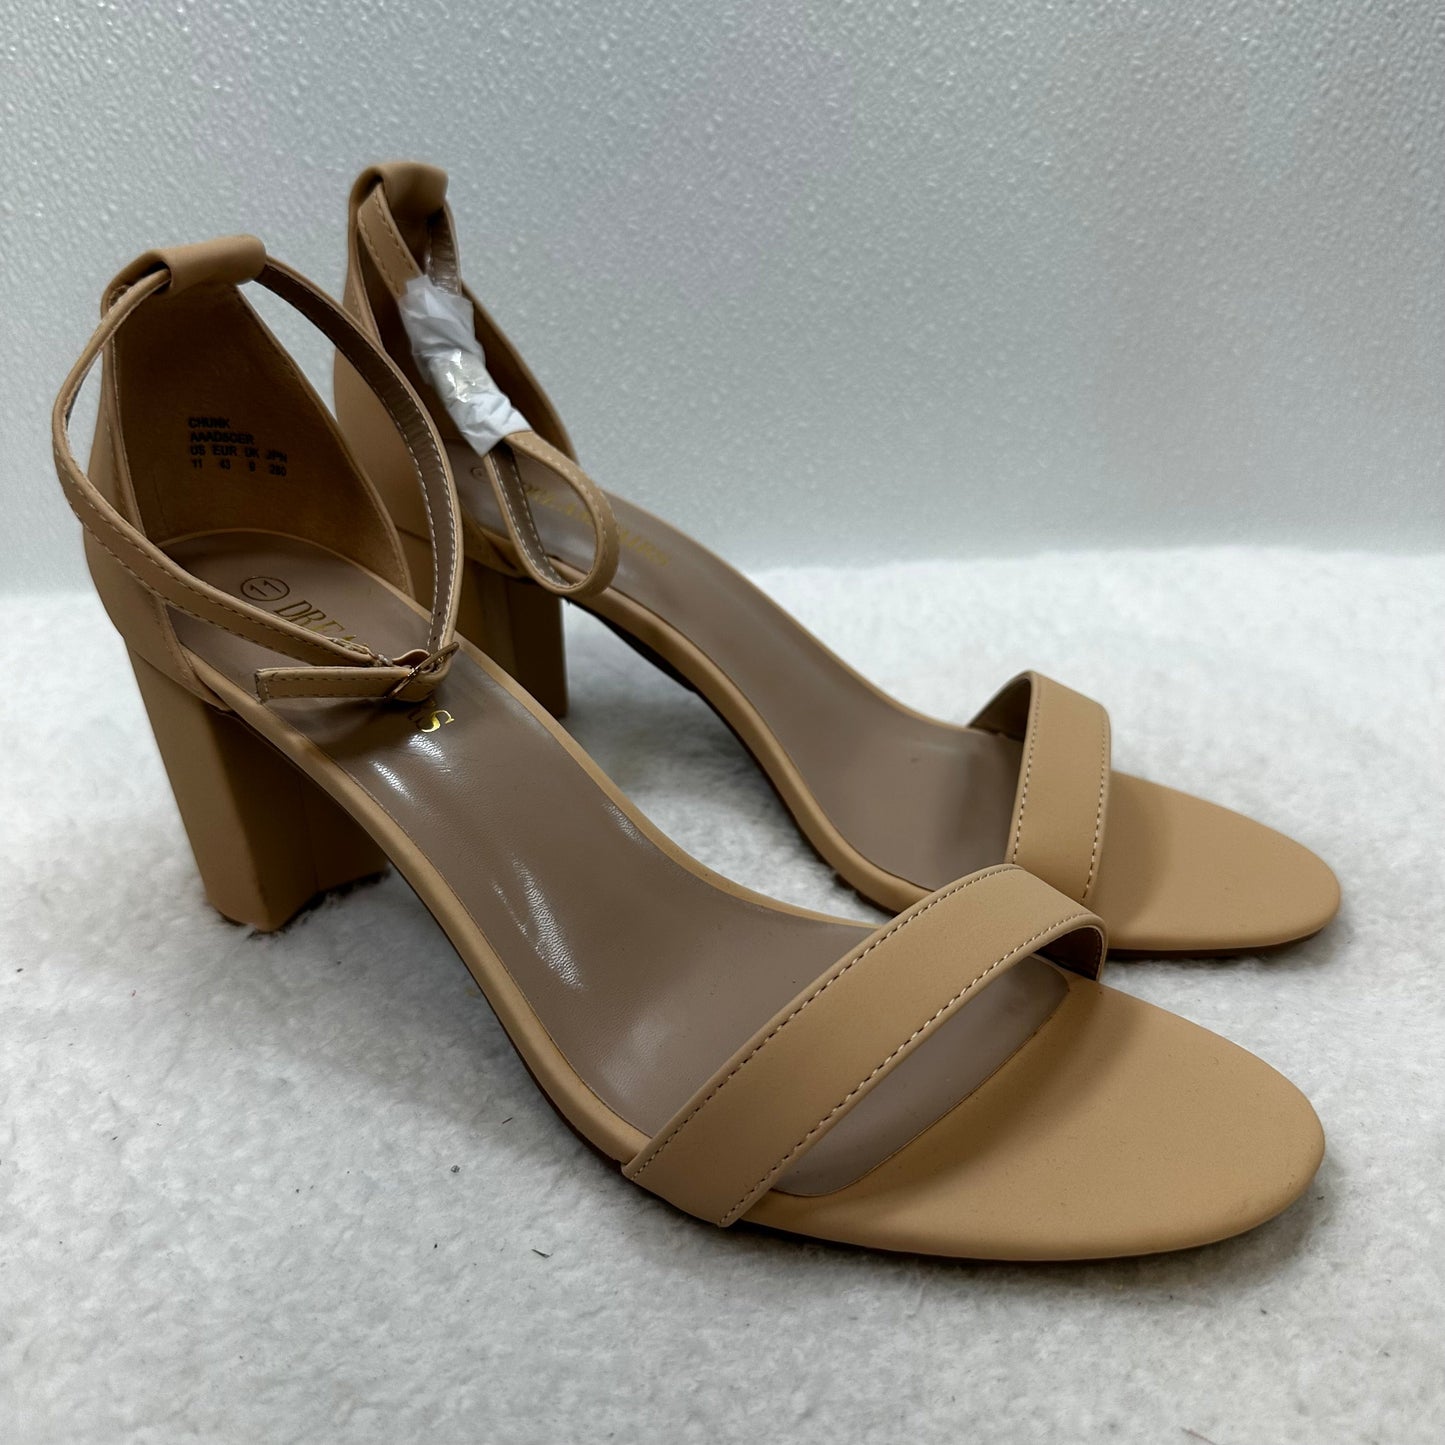 Nude Shoes Heels Block Clothes Mentor, Size 11